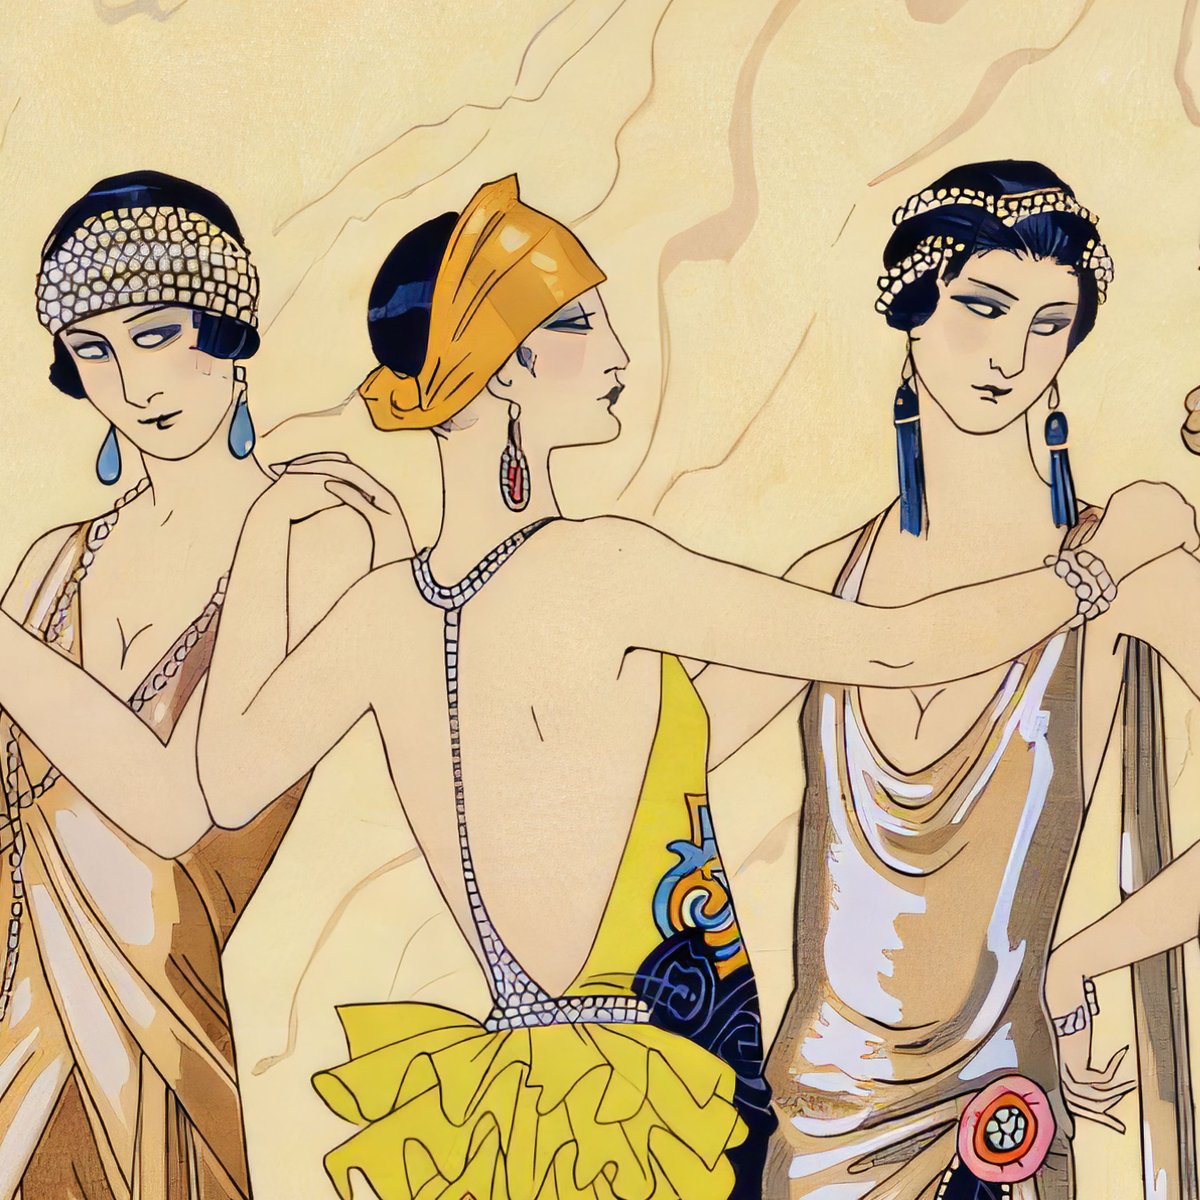 VINTAGE Ladies In Paris I Art Deco, Fashion, 1920s, French 
Vintage artwork, c. the 1920s, digitally enhanced while retaining all of its original character and beauty!
#artdeco #french #1920s #roaring20s #france #ladies #fashion #fashionablewomen #wallart #etsy #etsywallart